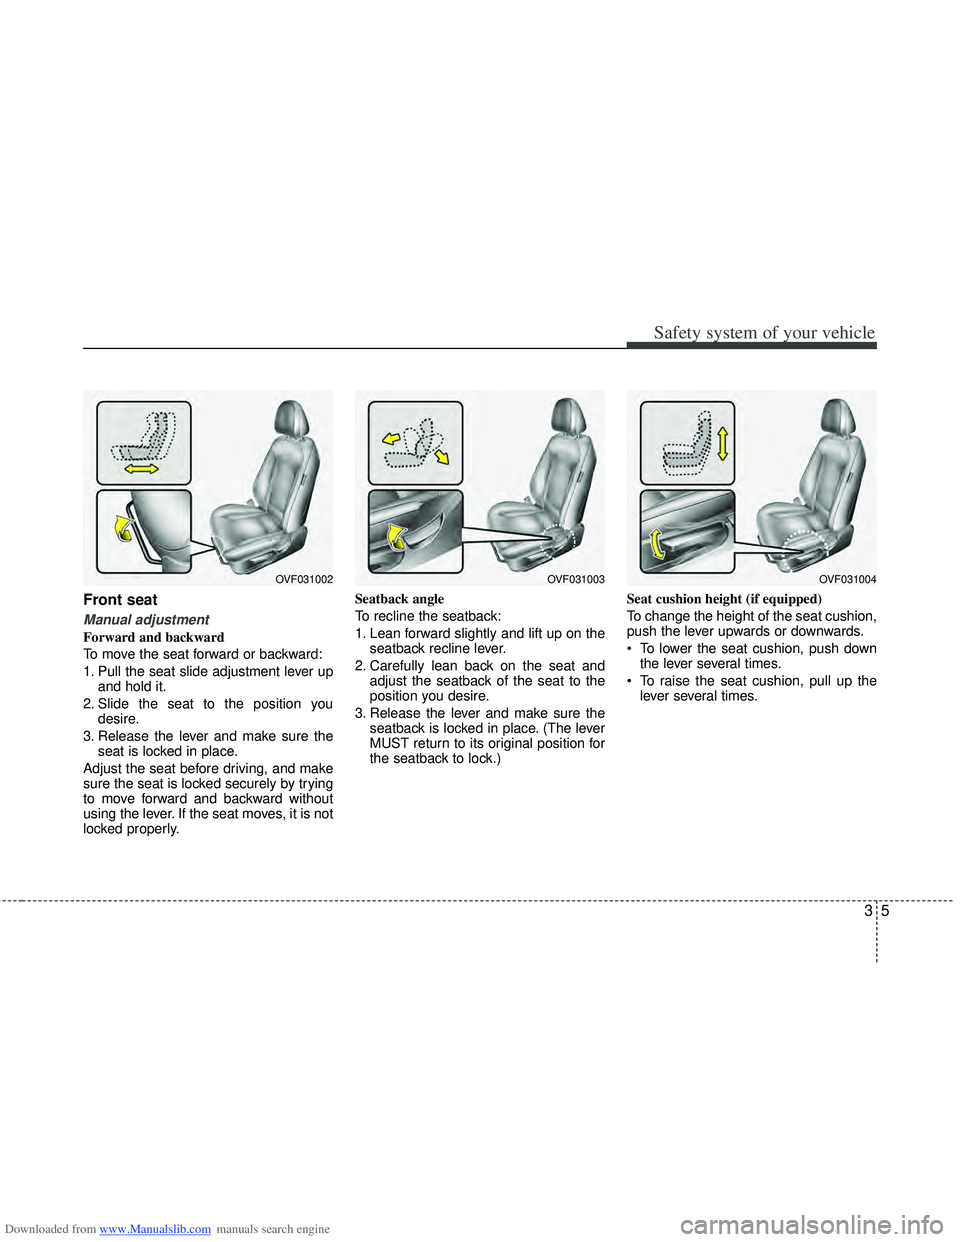 HYUNDAI I40 2014 Owners Manual Downloaded from www.Manualslib.com manuals search engine 35
Safety system of your vehicle
Front seat 
Manual adjustment 
Forward and backward
To move the seat forward or backward:
1. Pull the seat sli